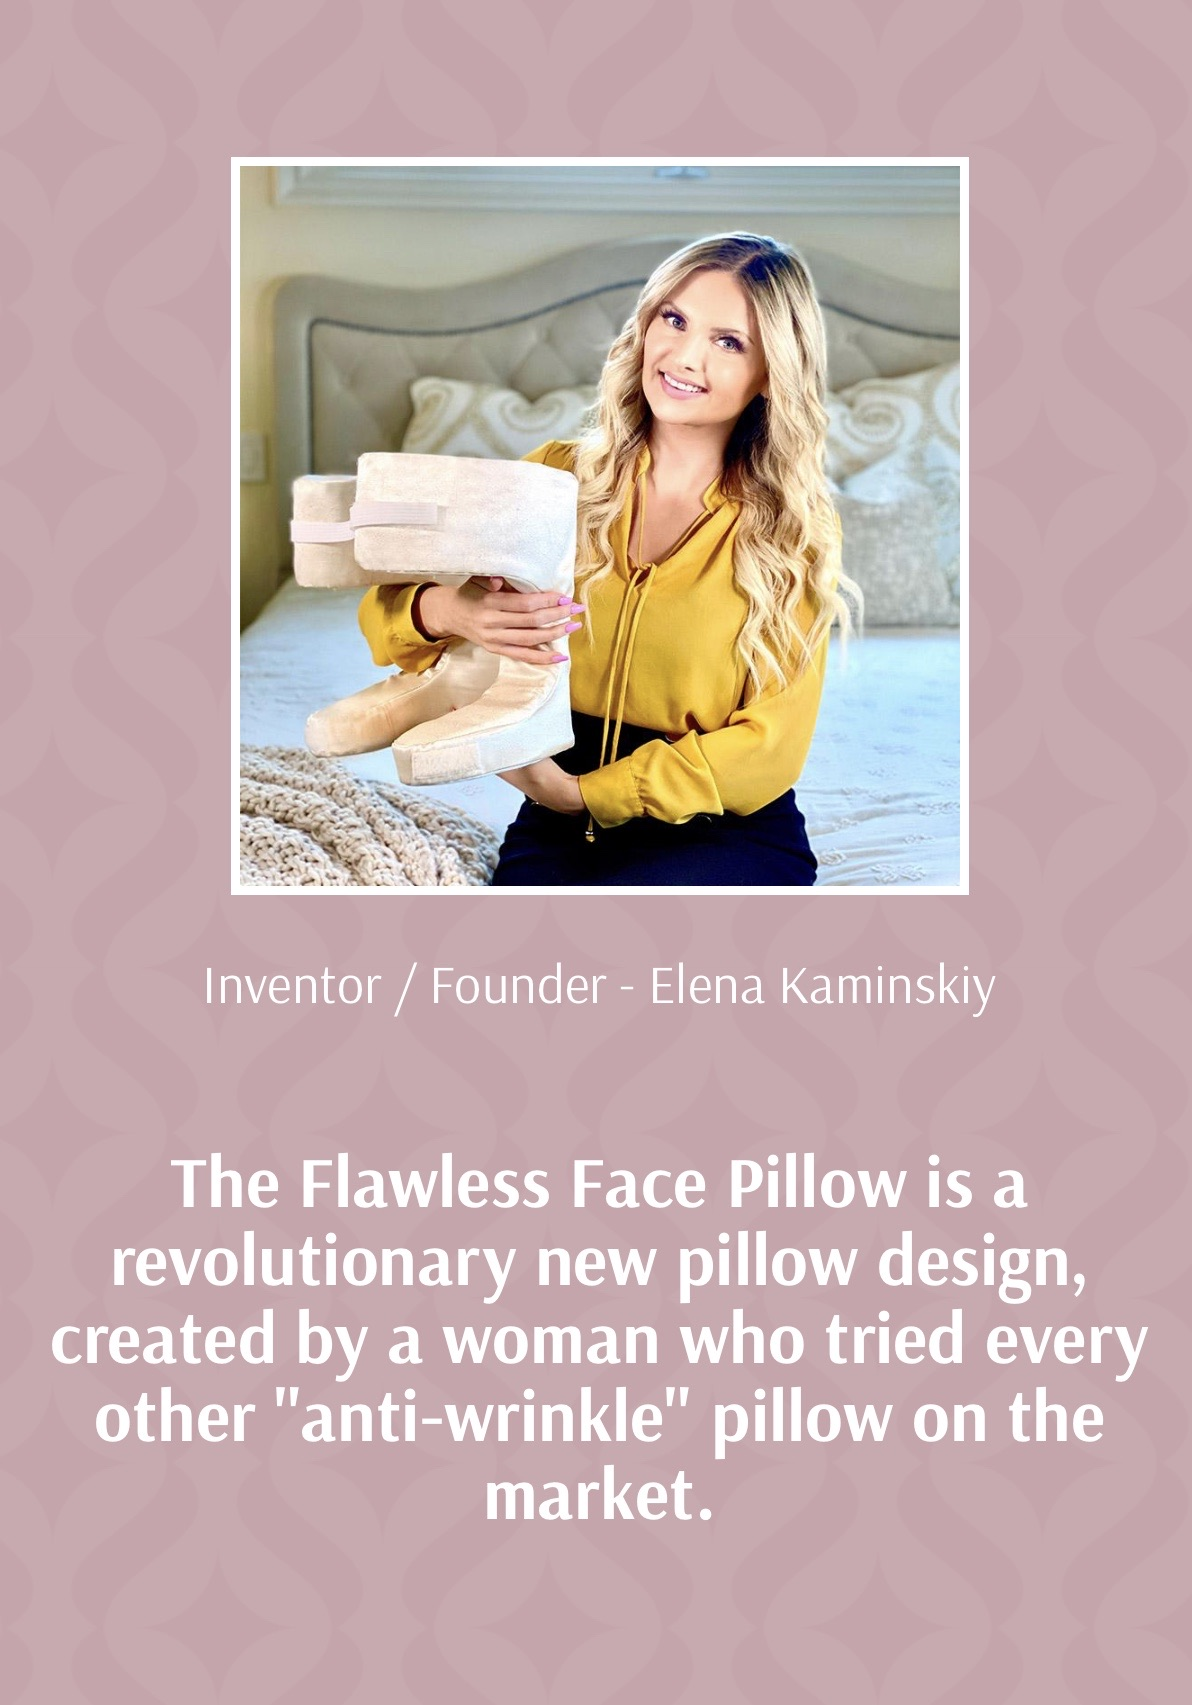 Best anti wrinkle / anti aging pillow on the market! – Flawless Face Pillow